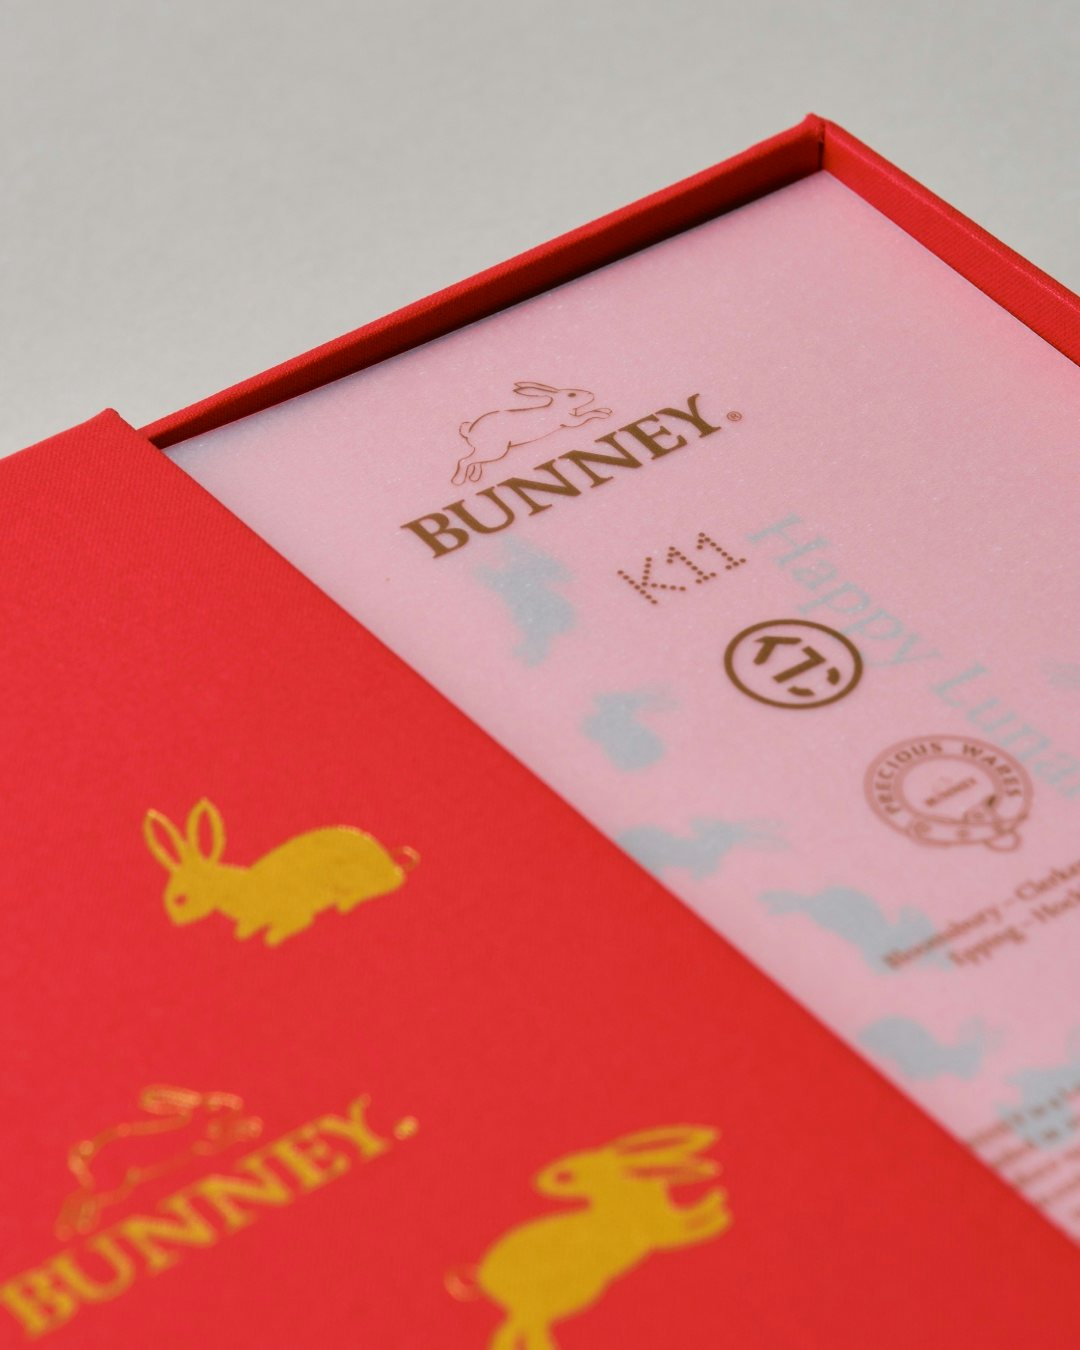 K11 and Bunney have created the first ever waterproof red envelopes, which naturally taps into today's forever-thriving utility-wear trend. Photo: K11